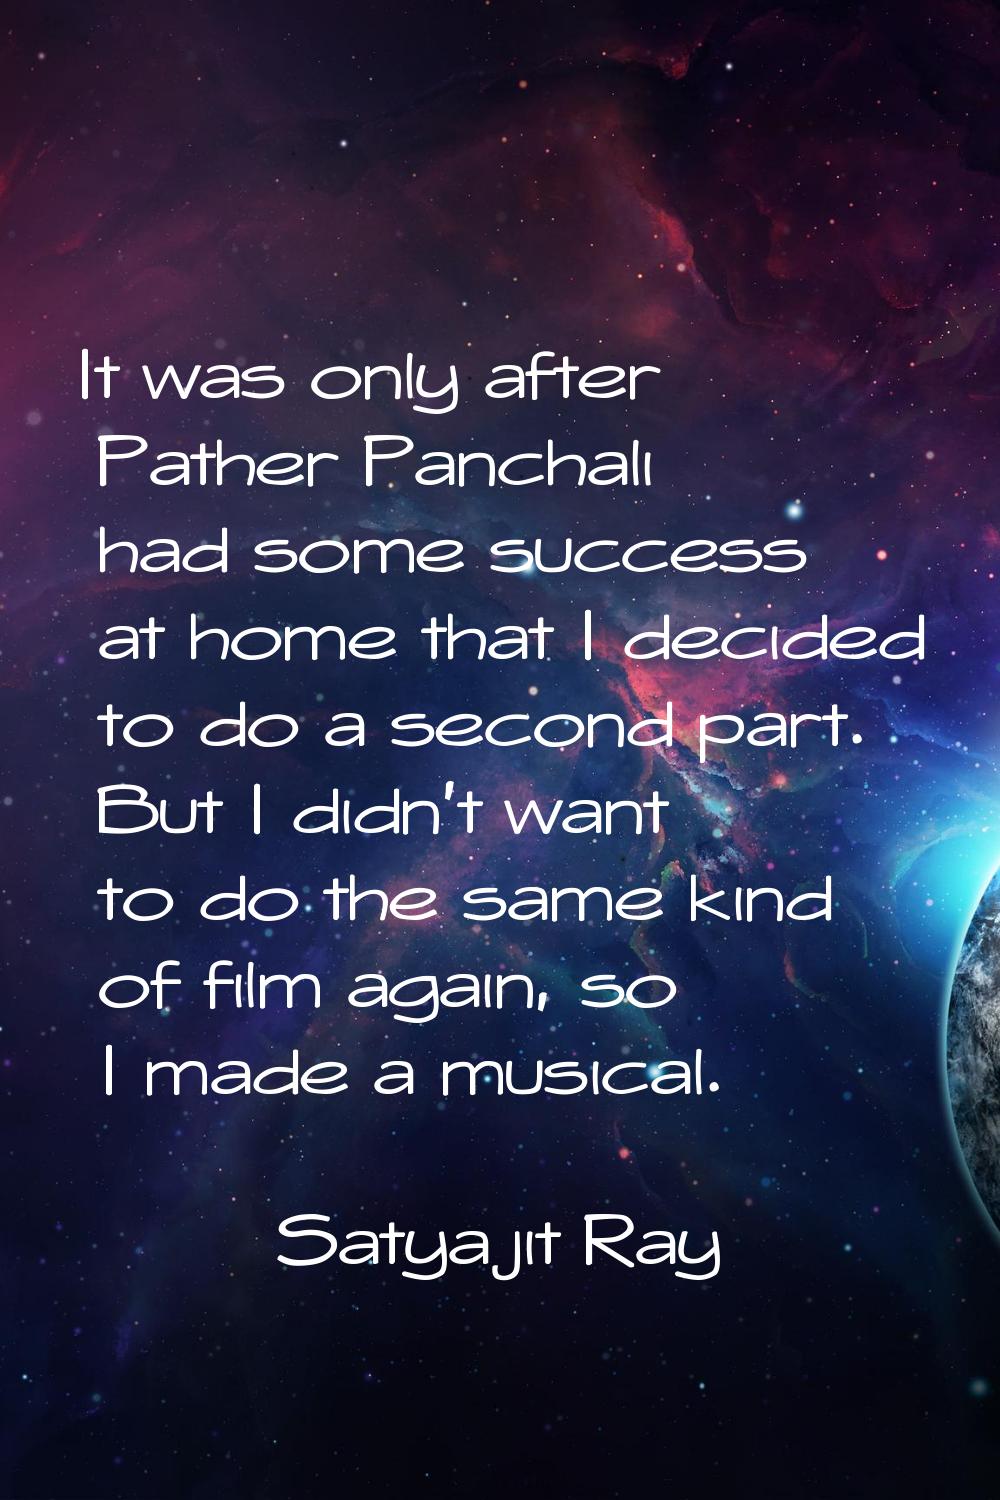 It was only after Pather Panchali had some success at home that I decided to do a second part. But 